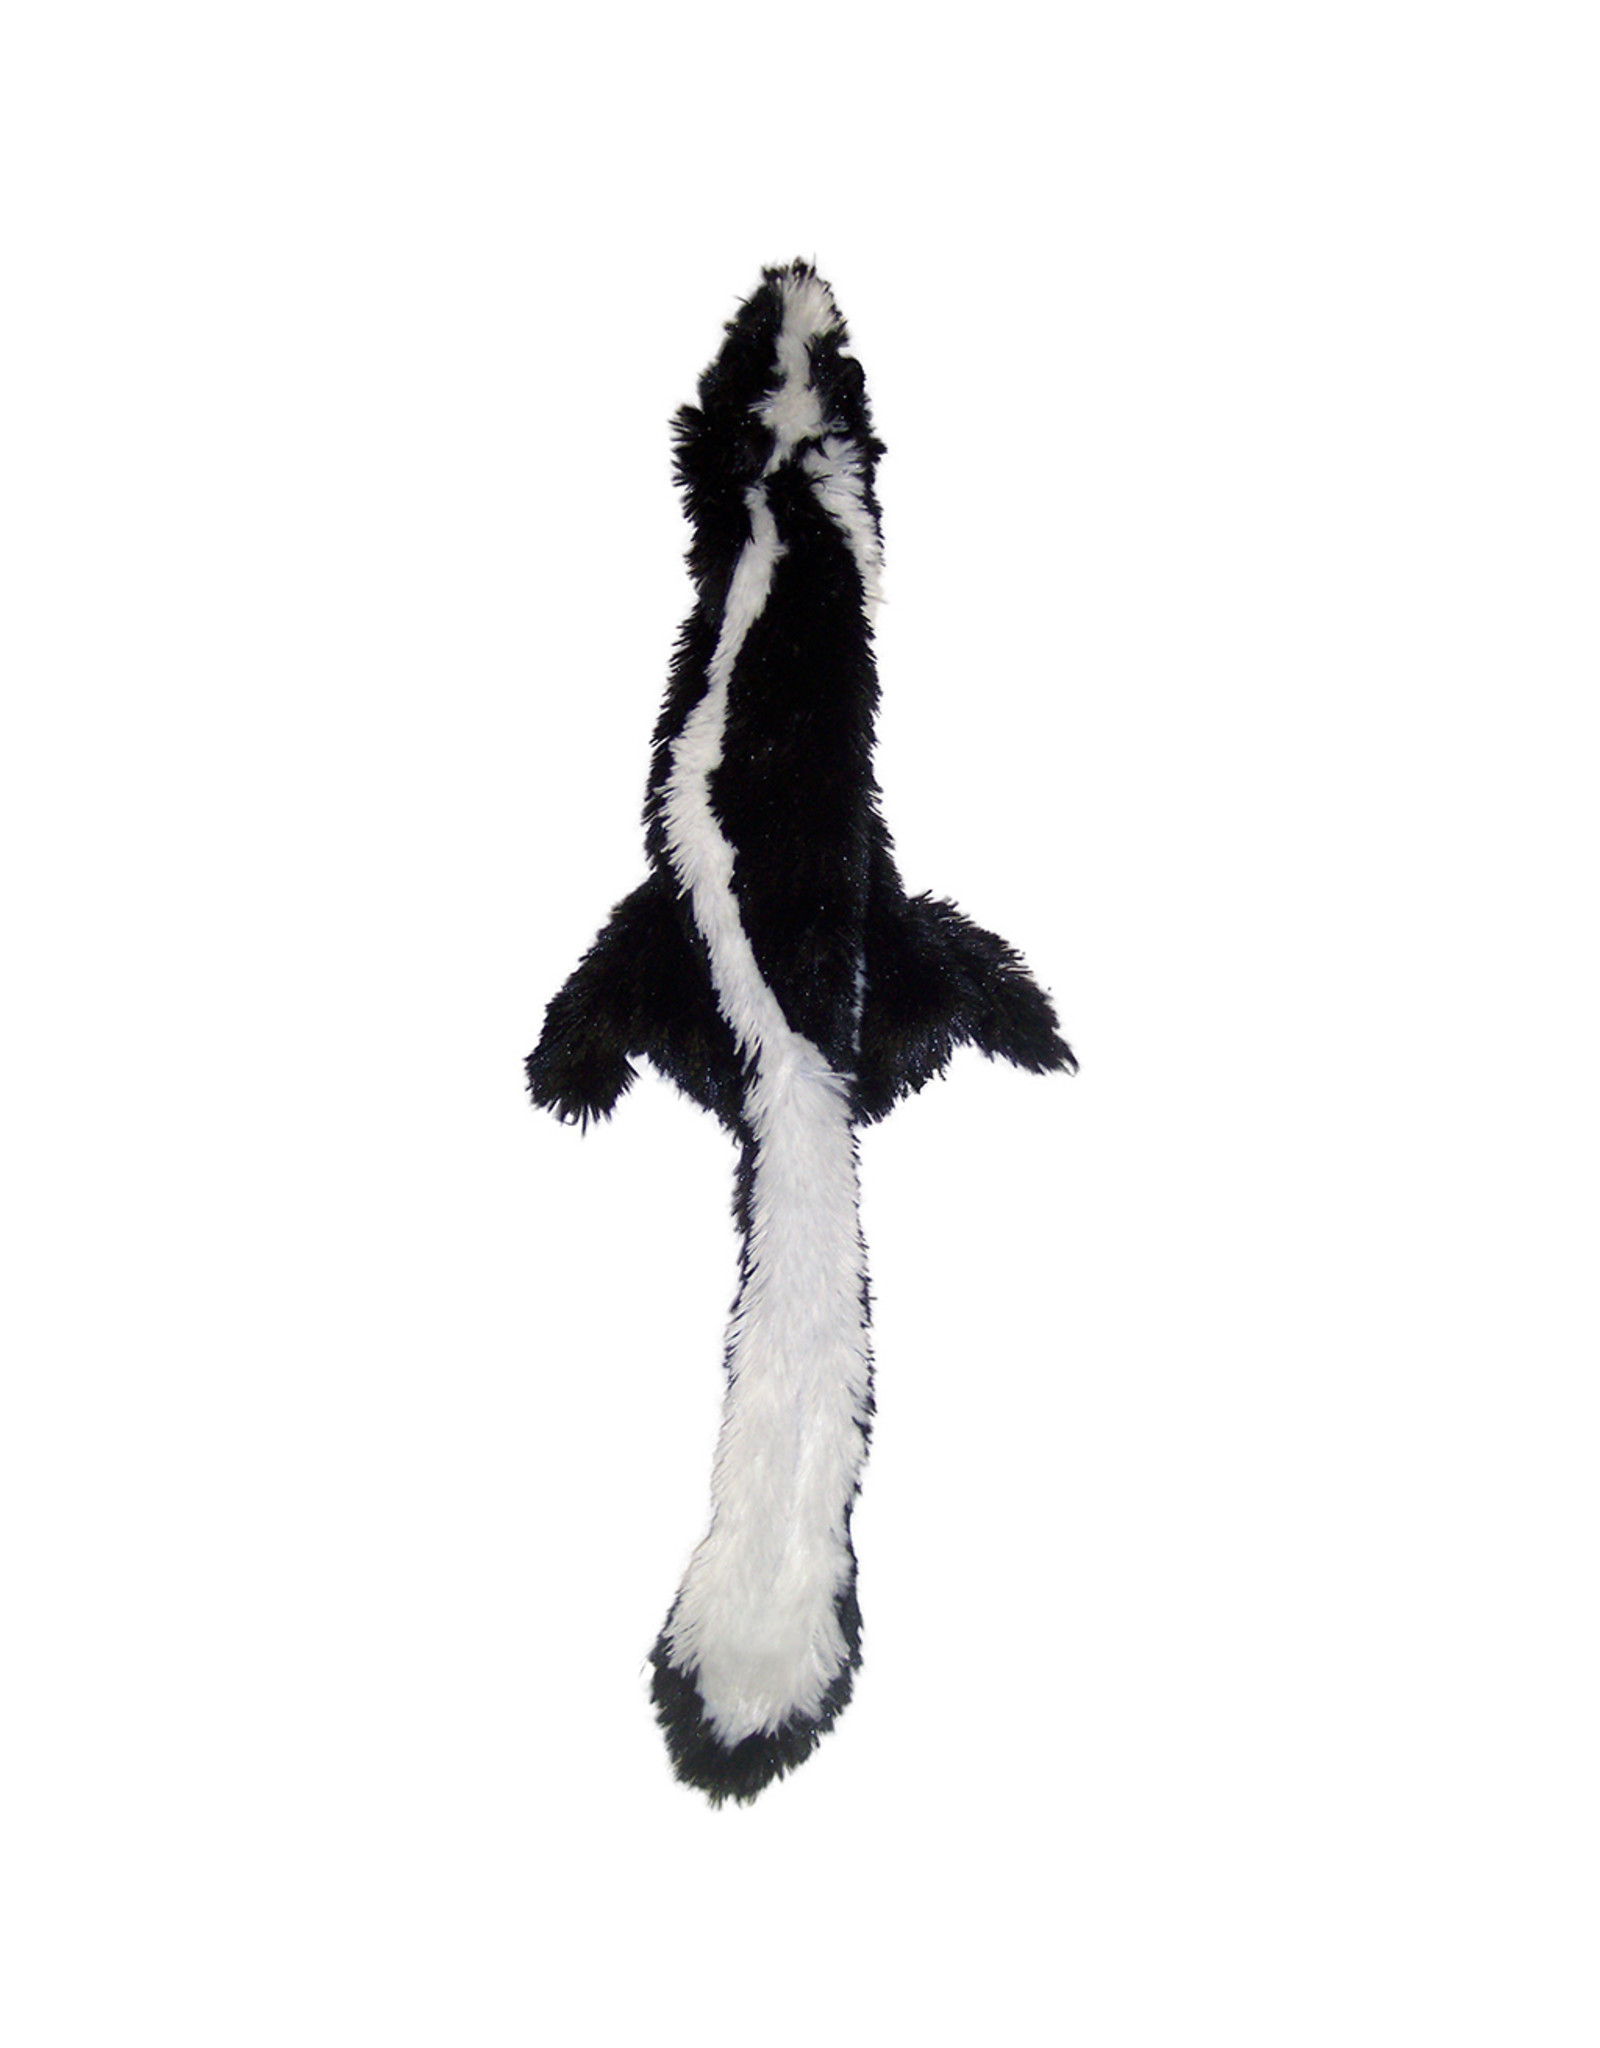 Spot - Ethical Pet Products Skinneeez Skunk